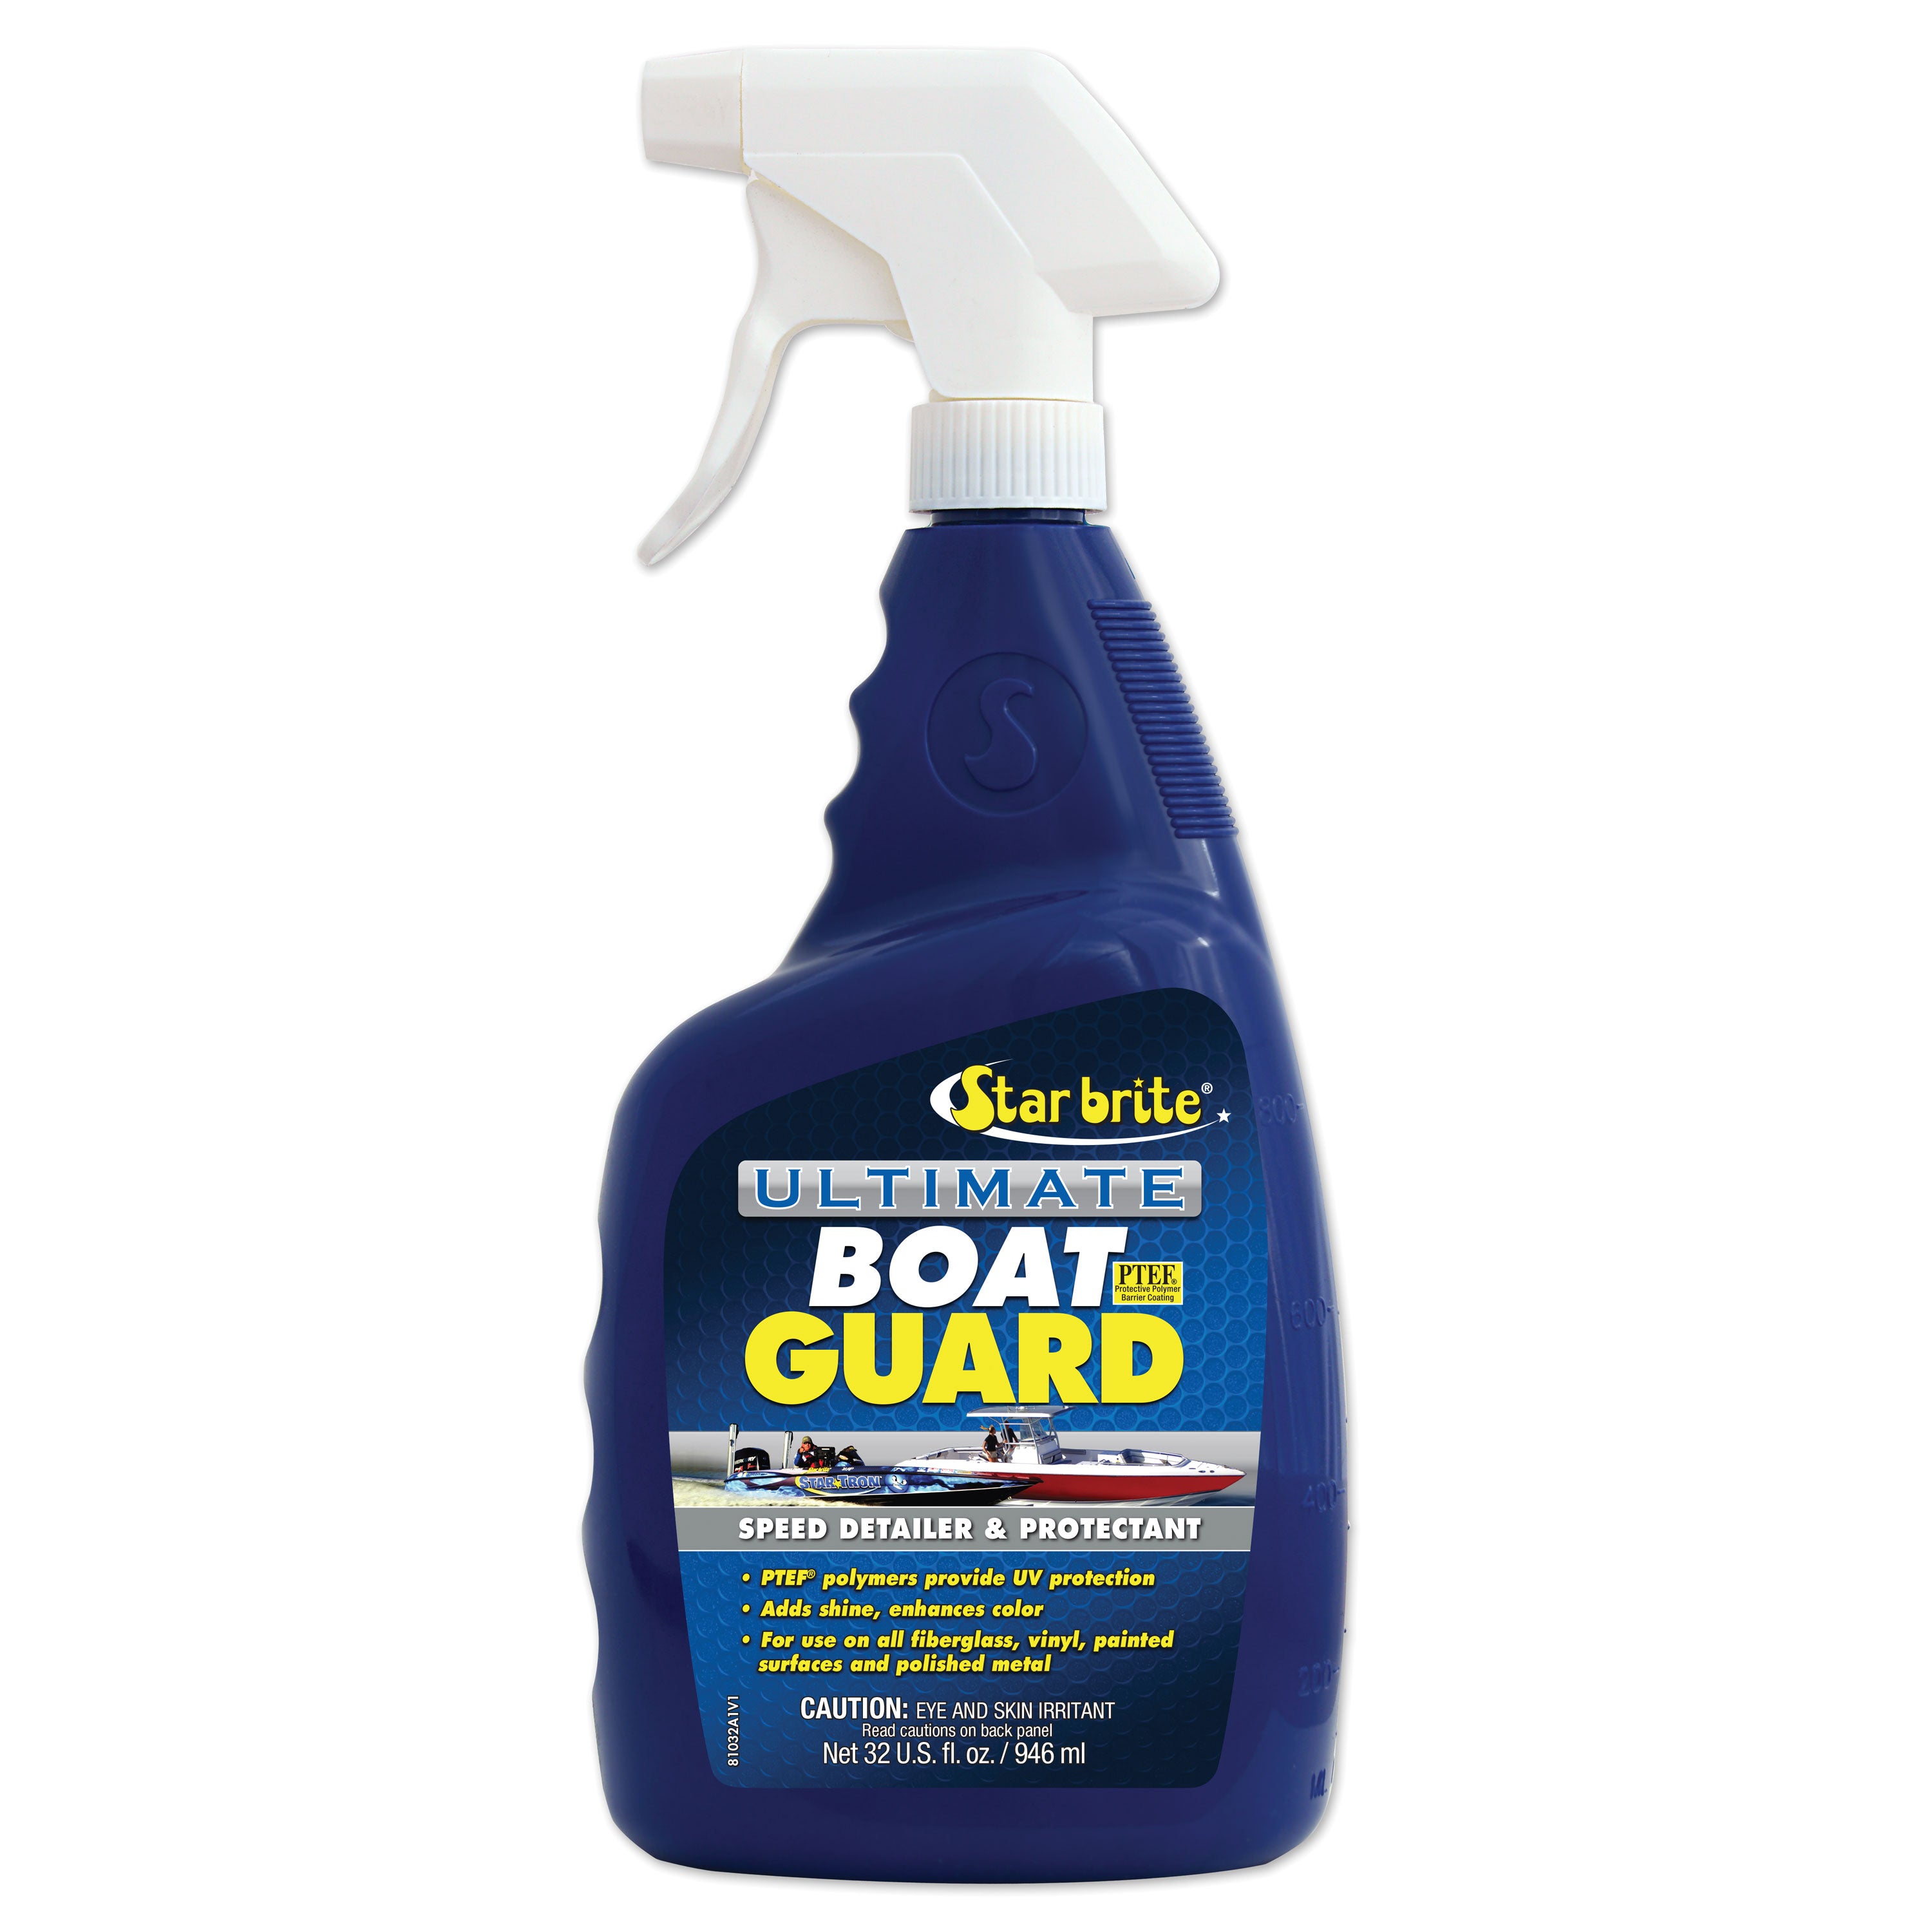 Star brite 081032 Ultimate Boat Guard Speed Detailer and Protectant - 32 oz